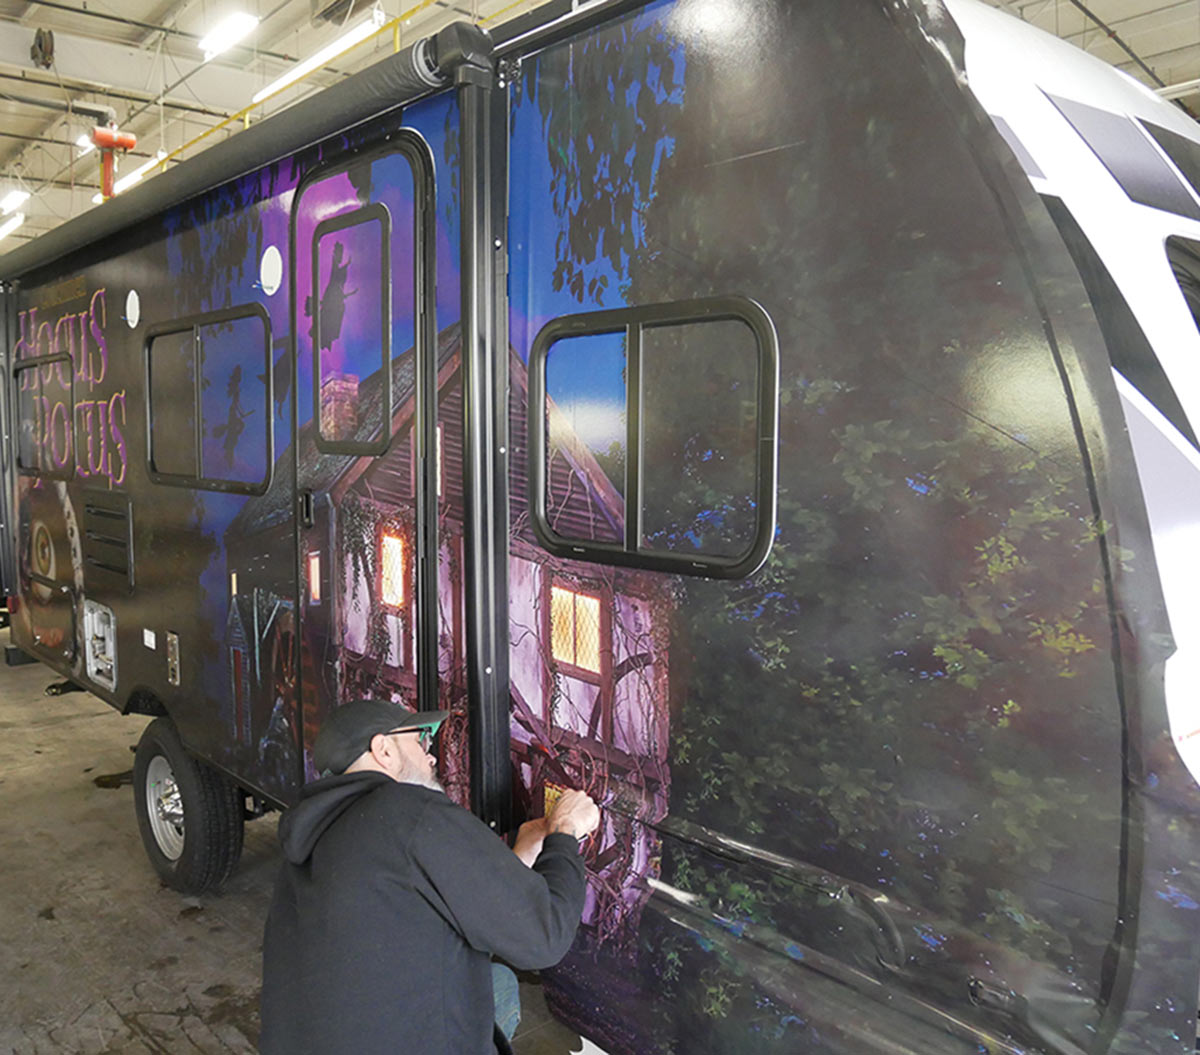 a man works on a Hocus Pocus themed graphic wrap on a travel trailer